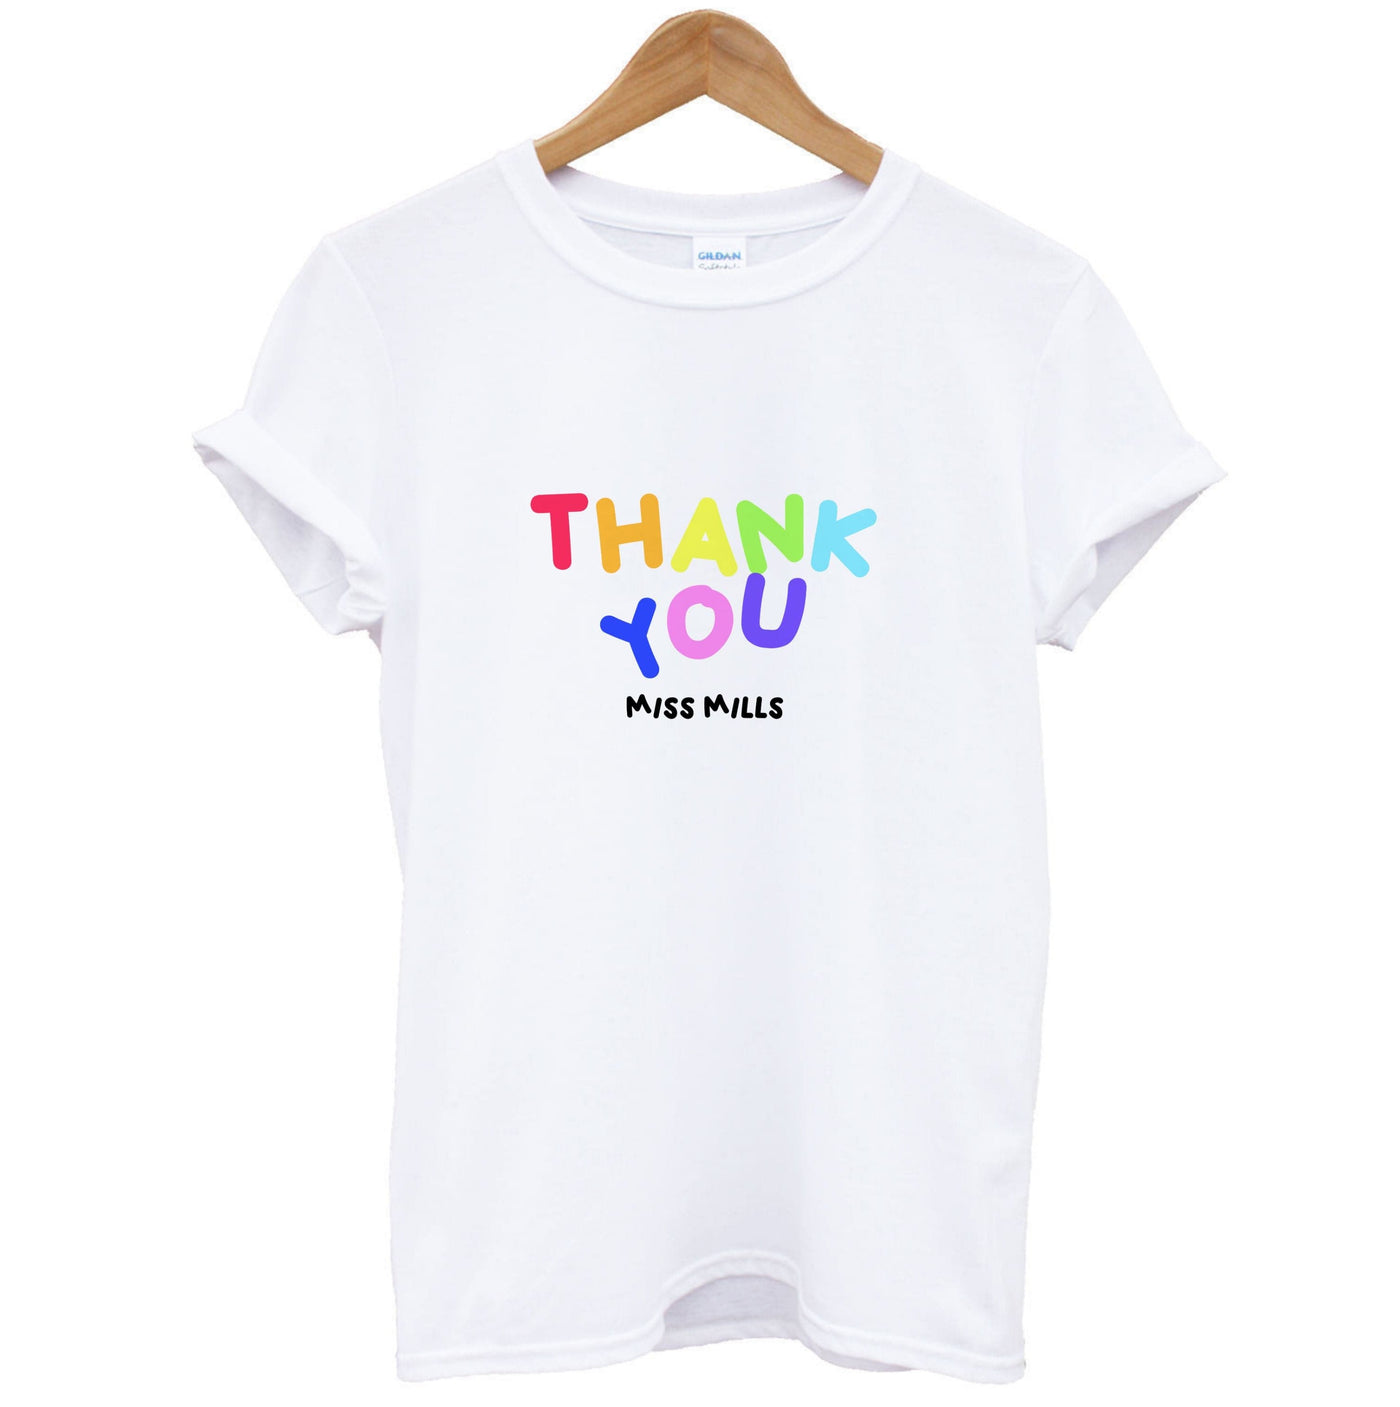 Thank You - Personalised Teachers Gift T-Shirt